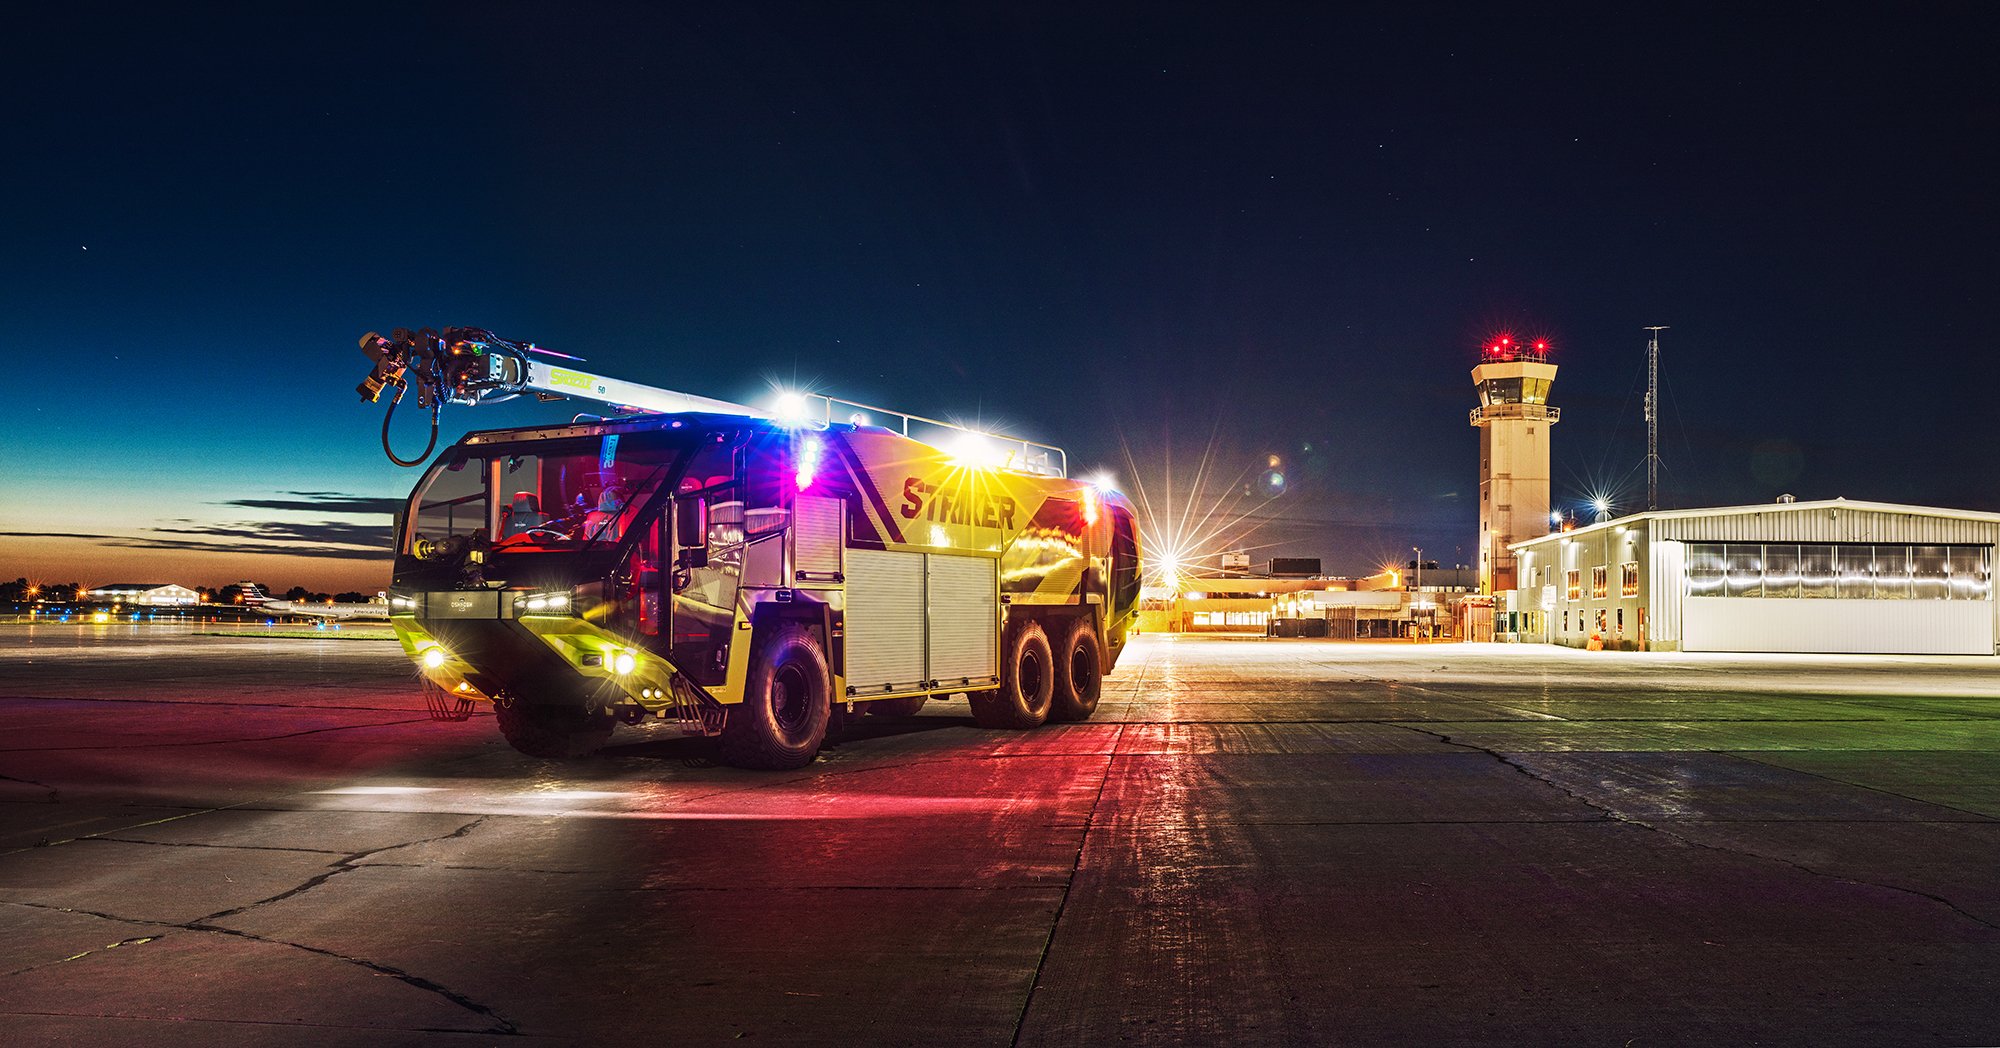 Oshkosh Airport Products' Striker parked at an airport at night.